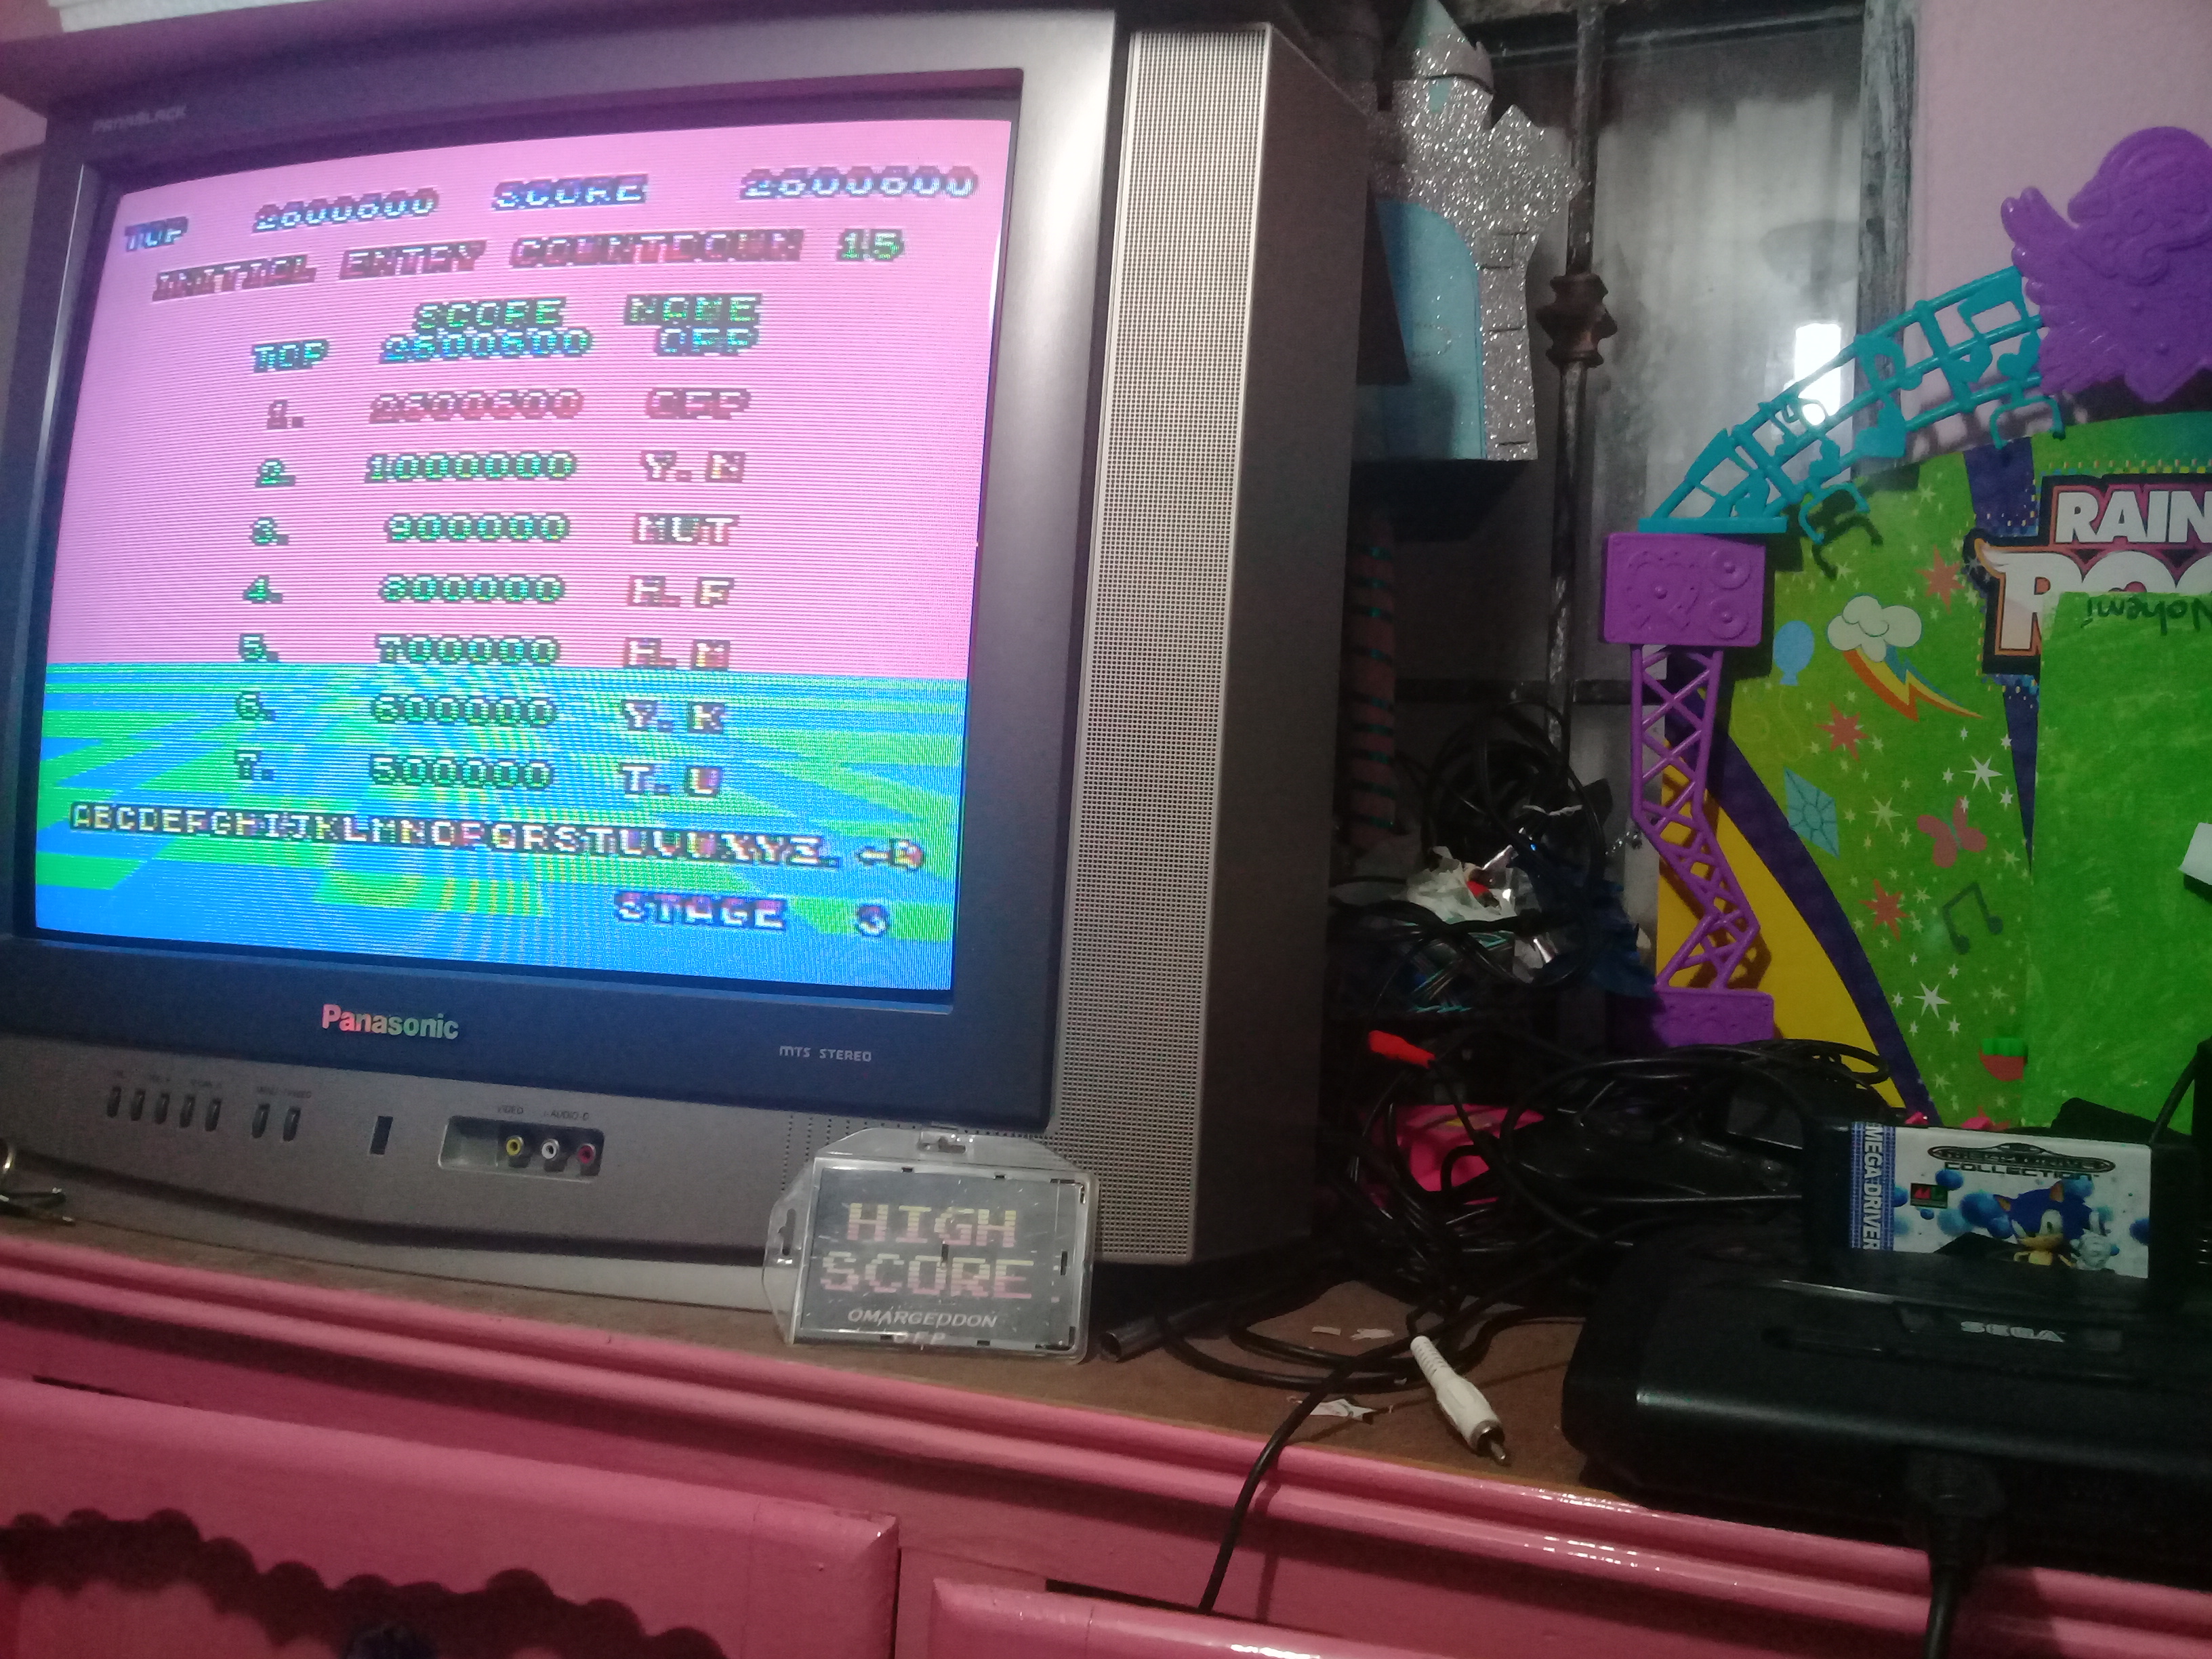 Space Harrier 2,600,600 points